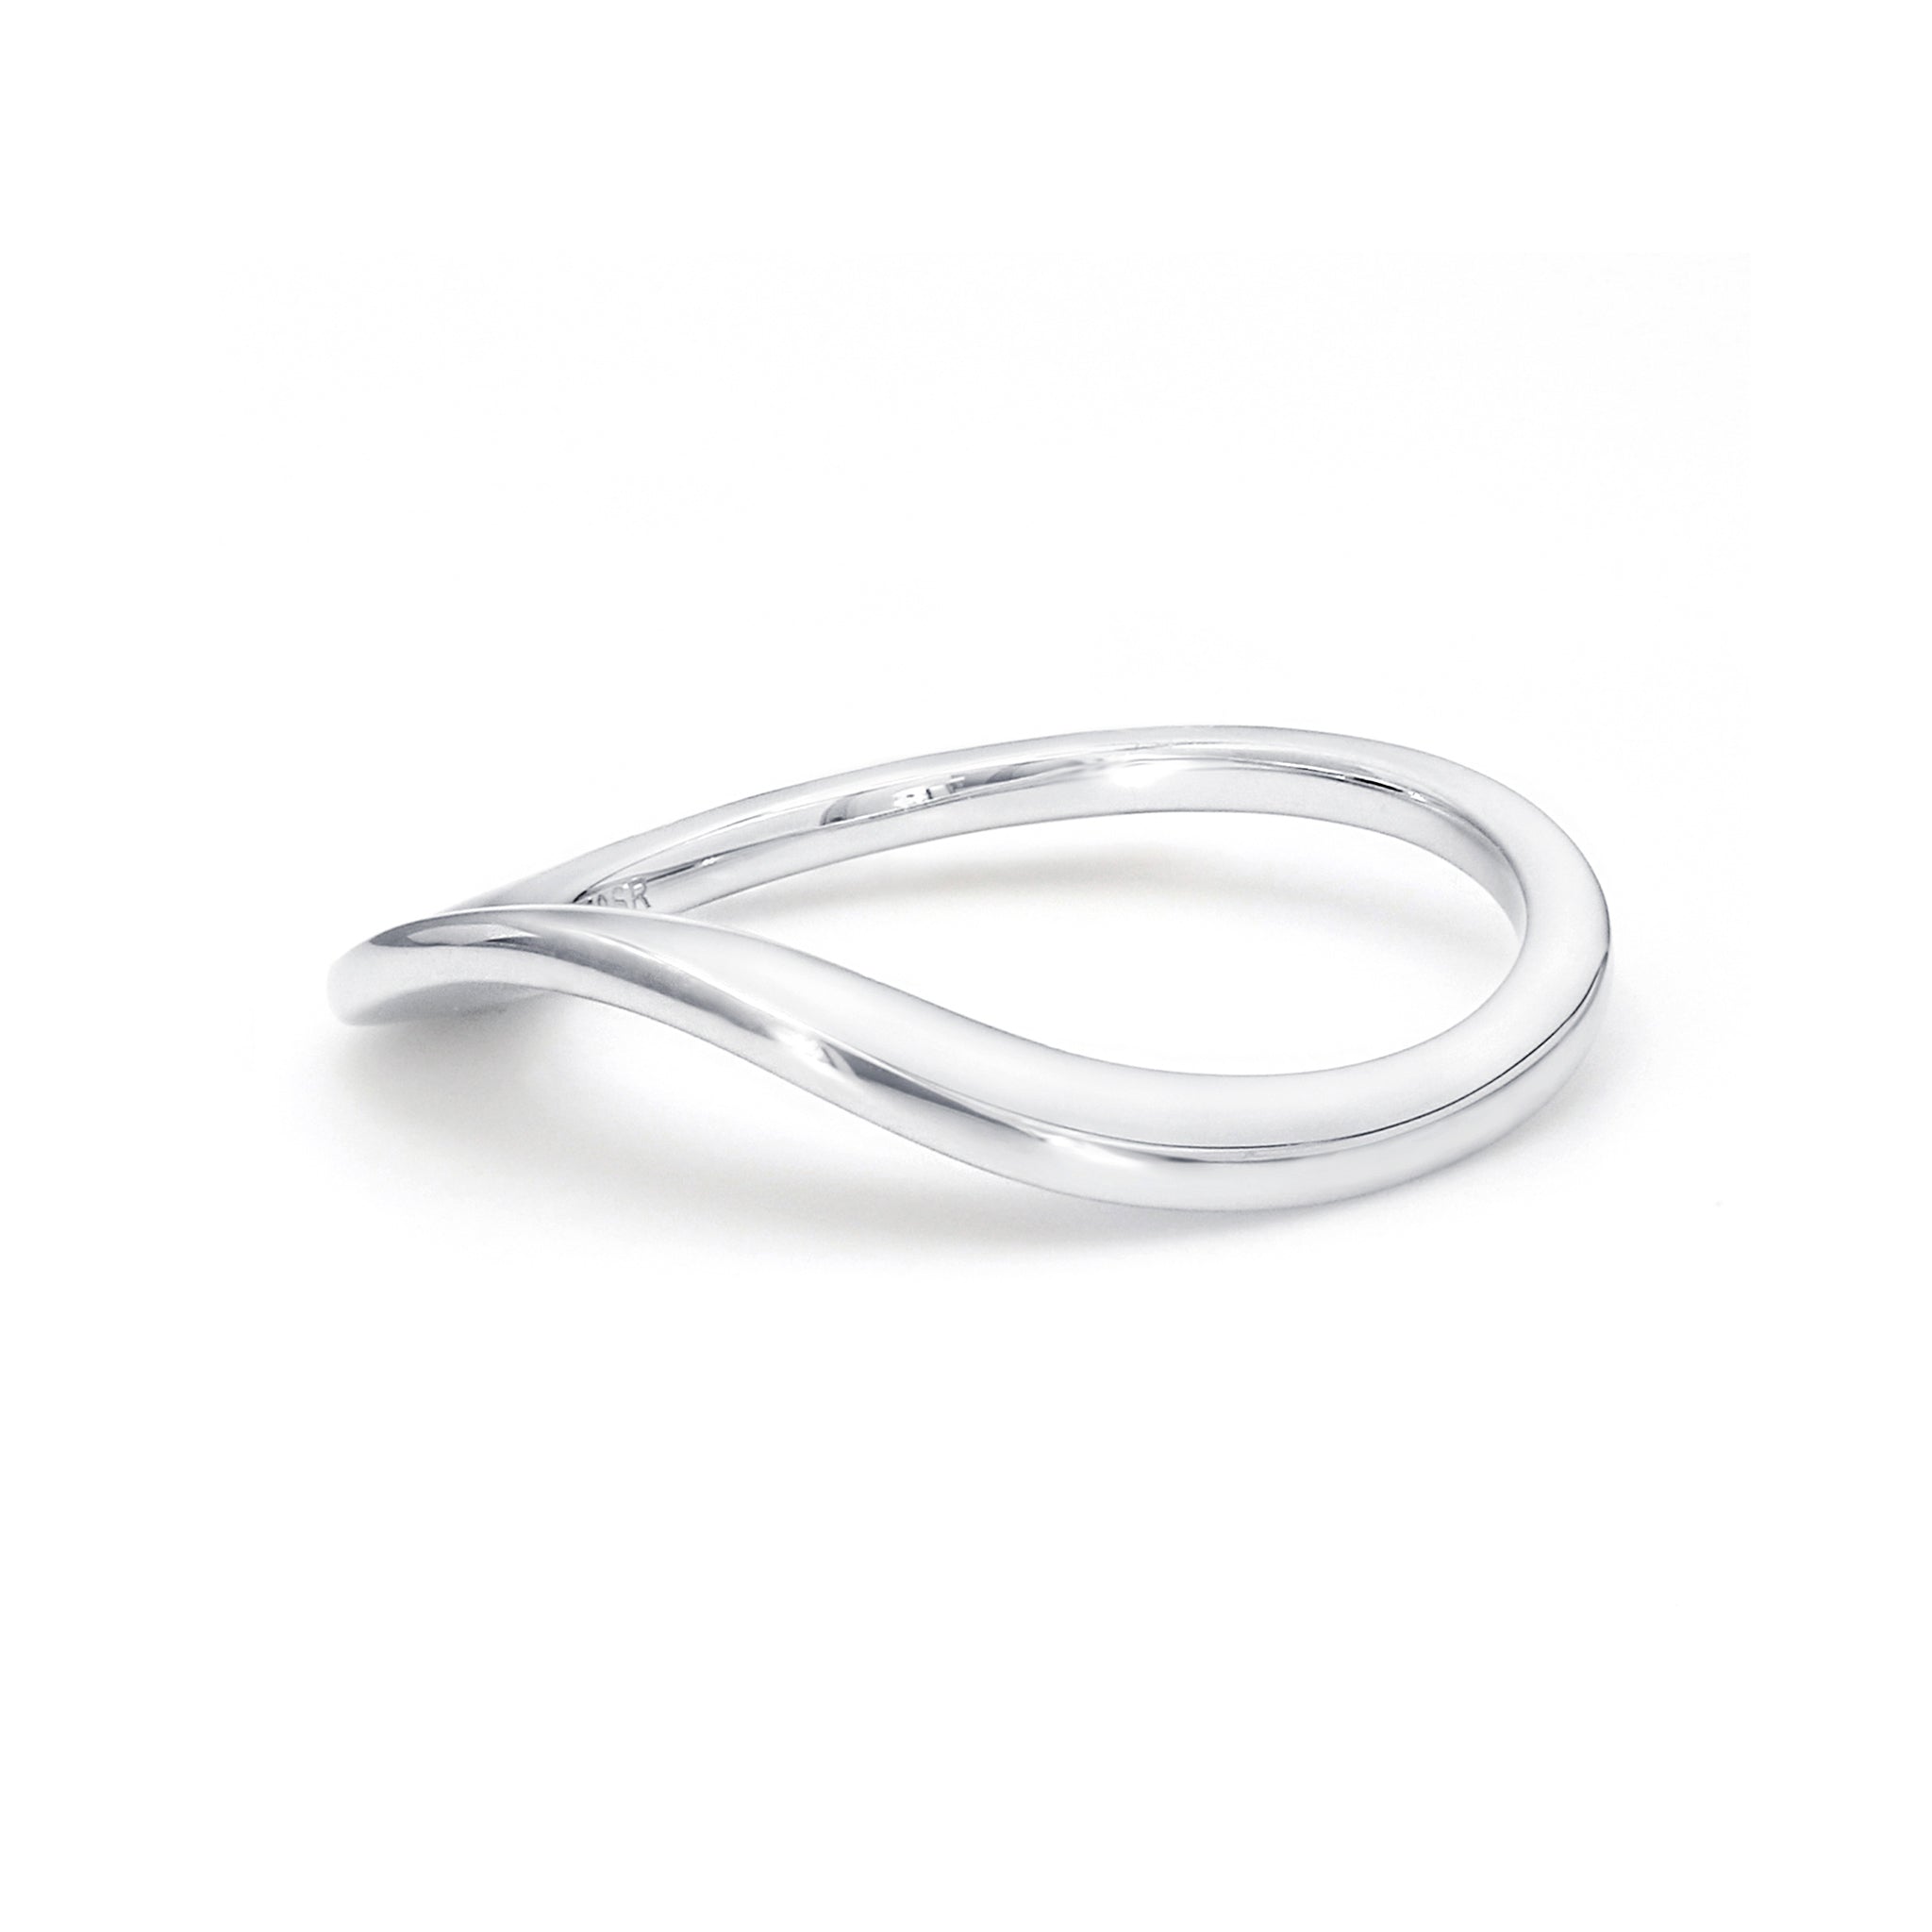 Shimansky - Silhouette Wedding Band crafted in 18K White Gold